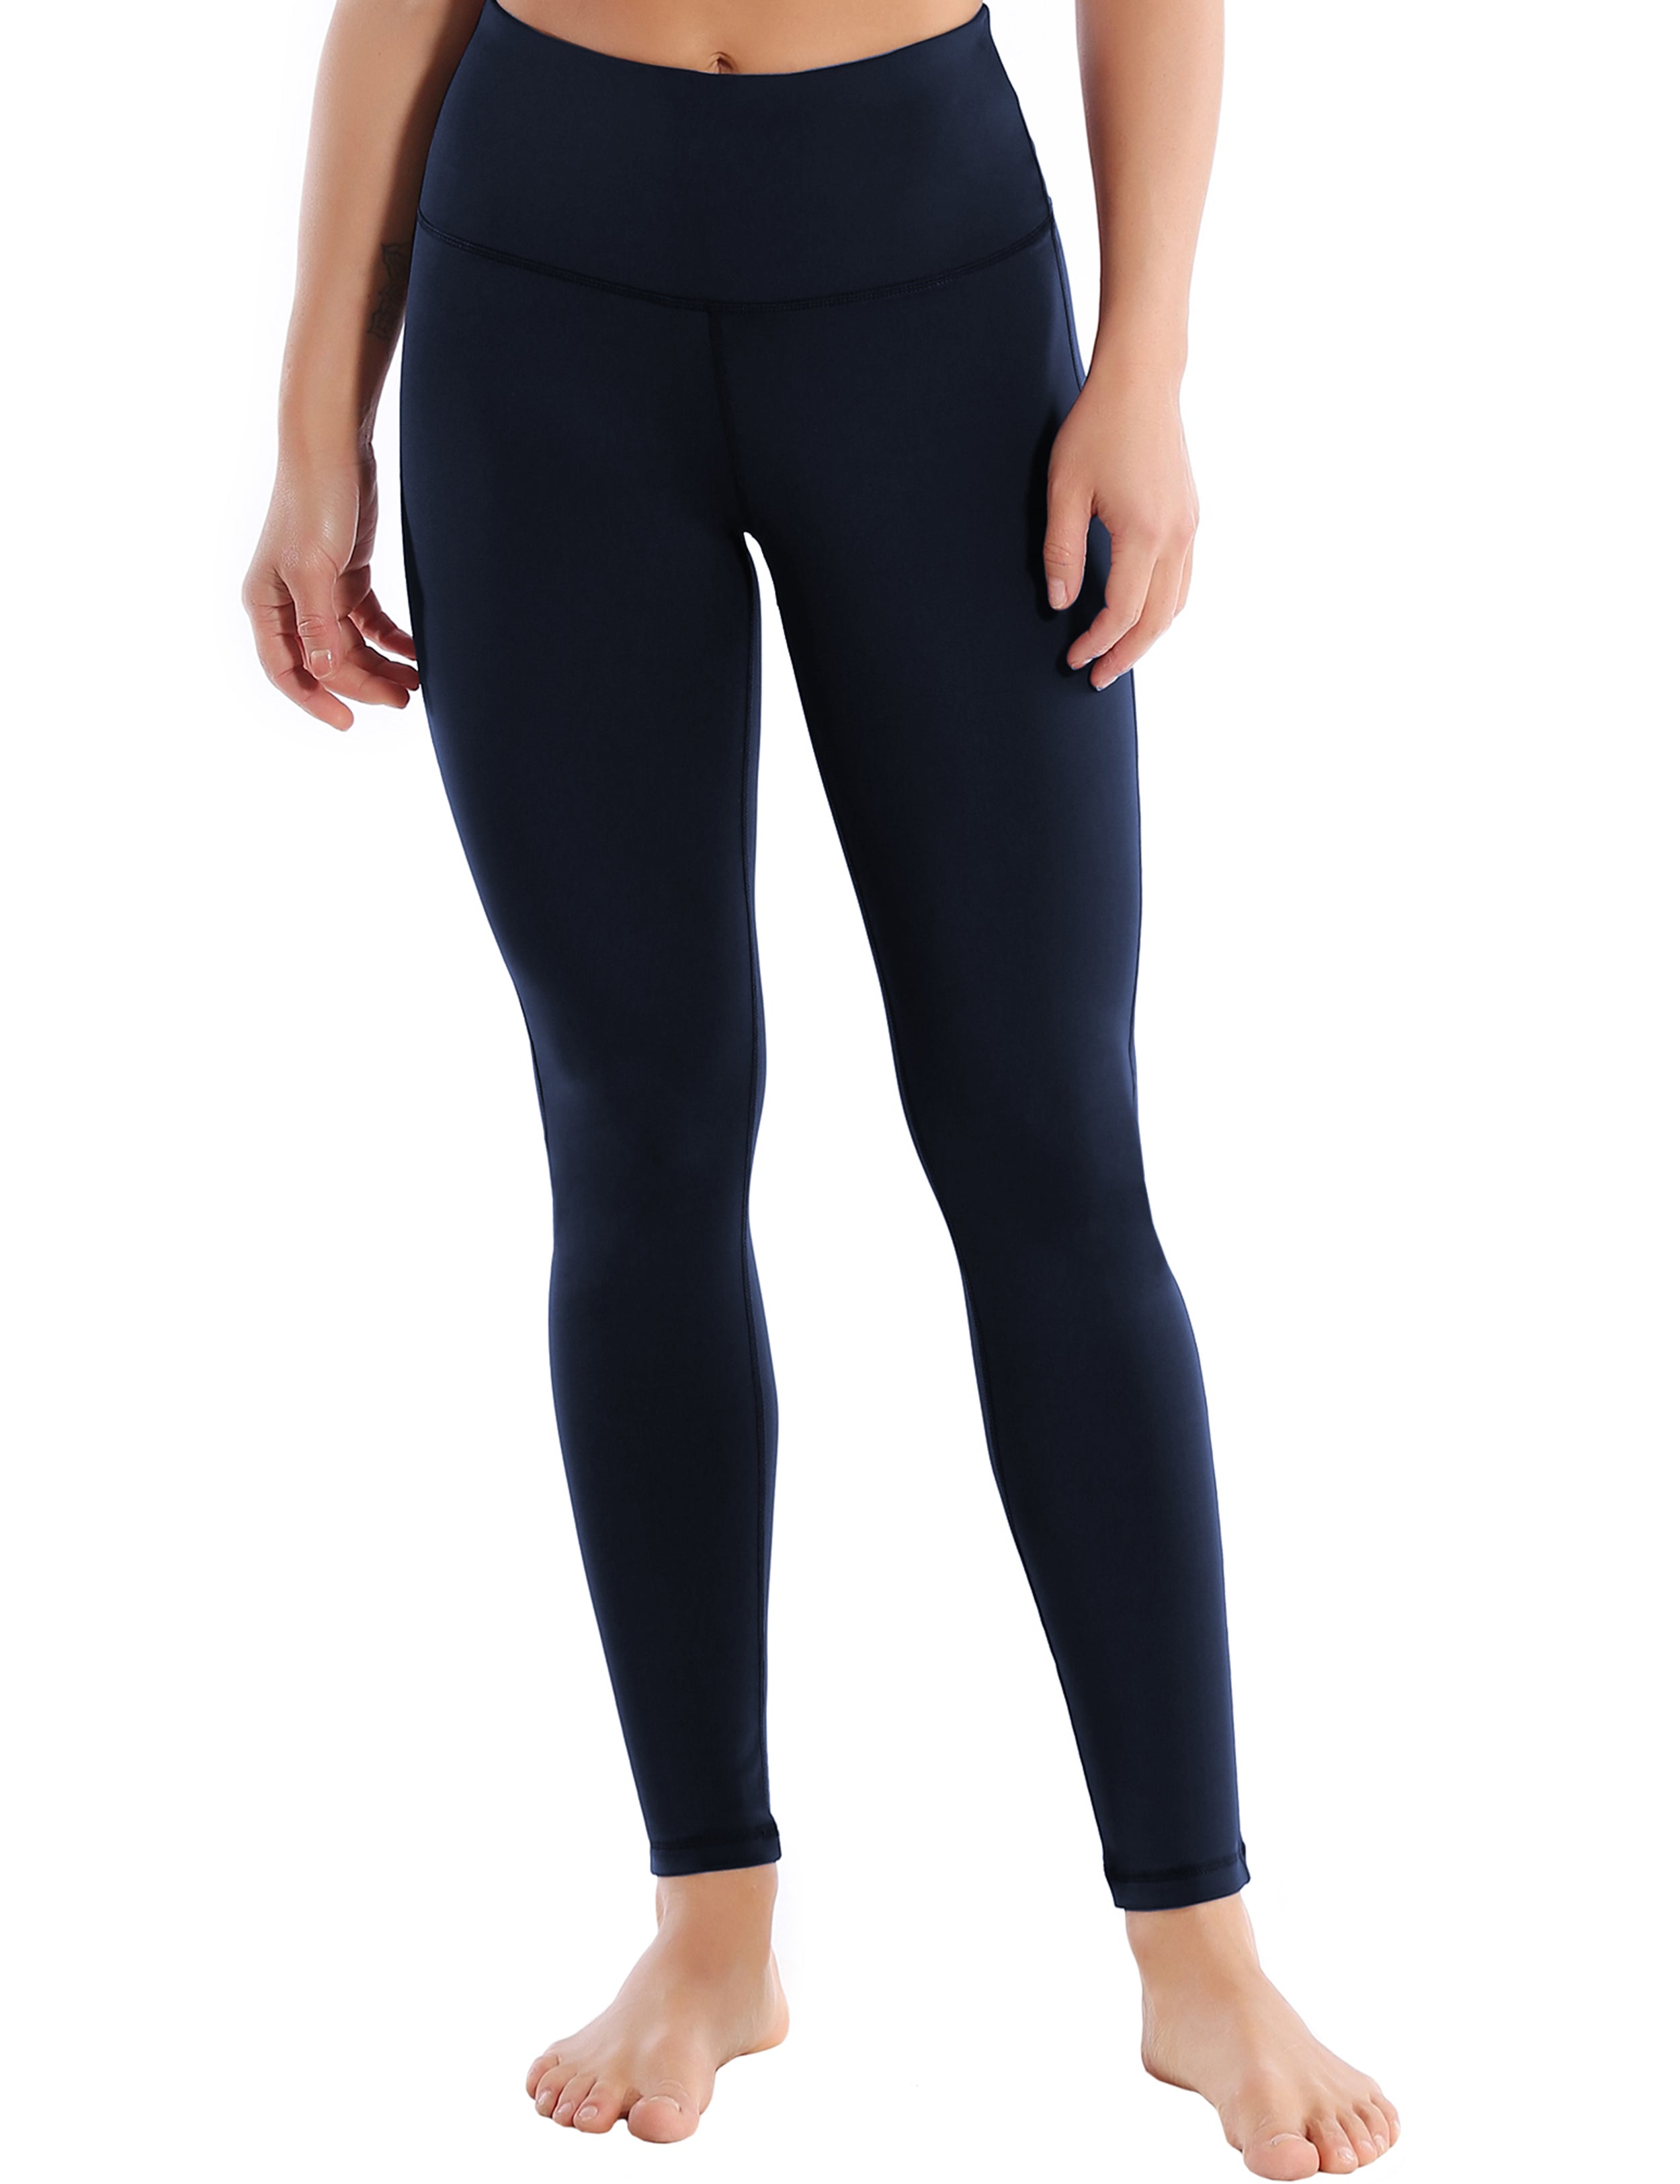 High Waist Side Line Golf Pants darknavy Side Line is Make Your Legs Look Longer and Thinner 75%Nylon/25%Spandex Fabric doesn't attract lint easily 4-way stretch No see-through Moisture-wicking Tummy control Inner pocket Two lengths